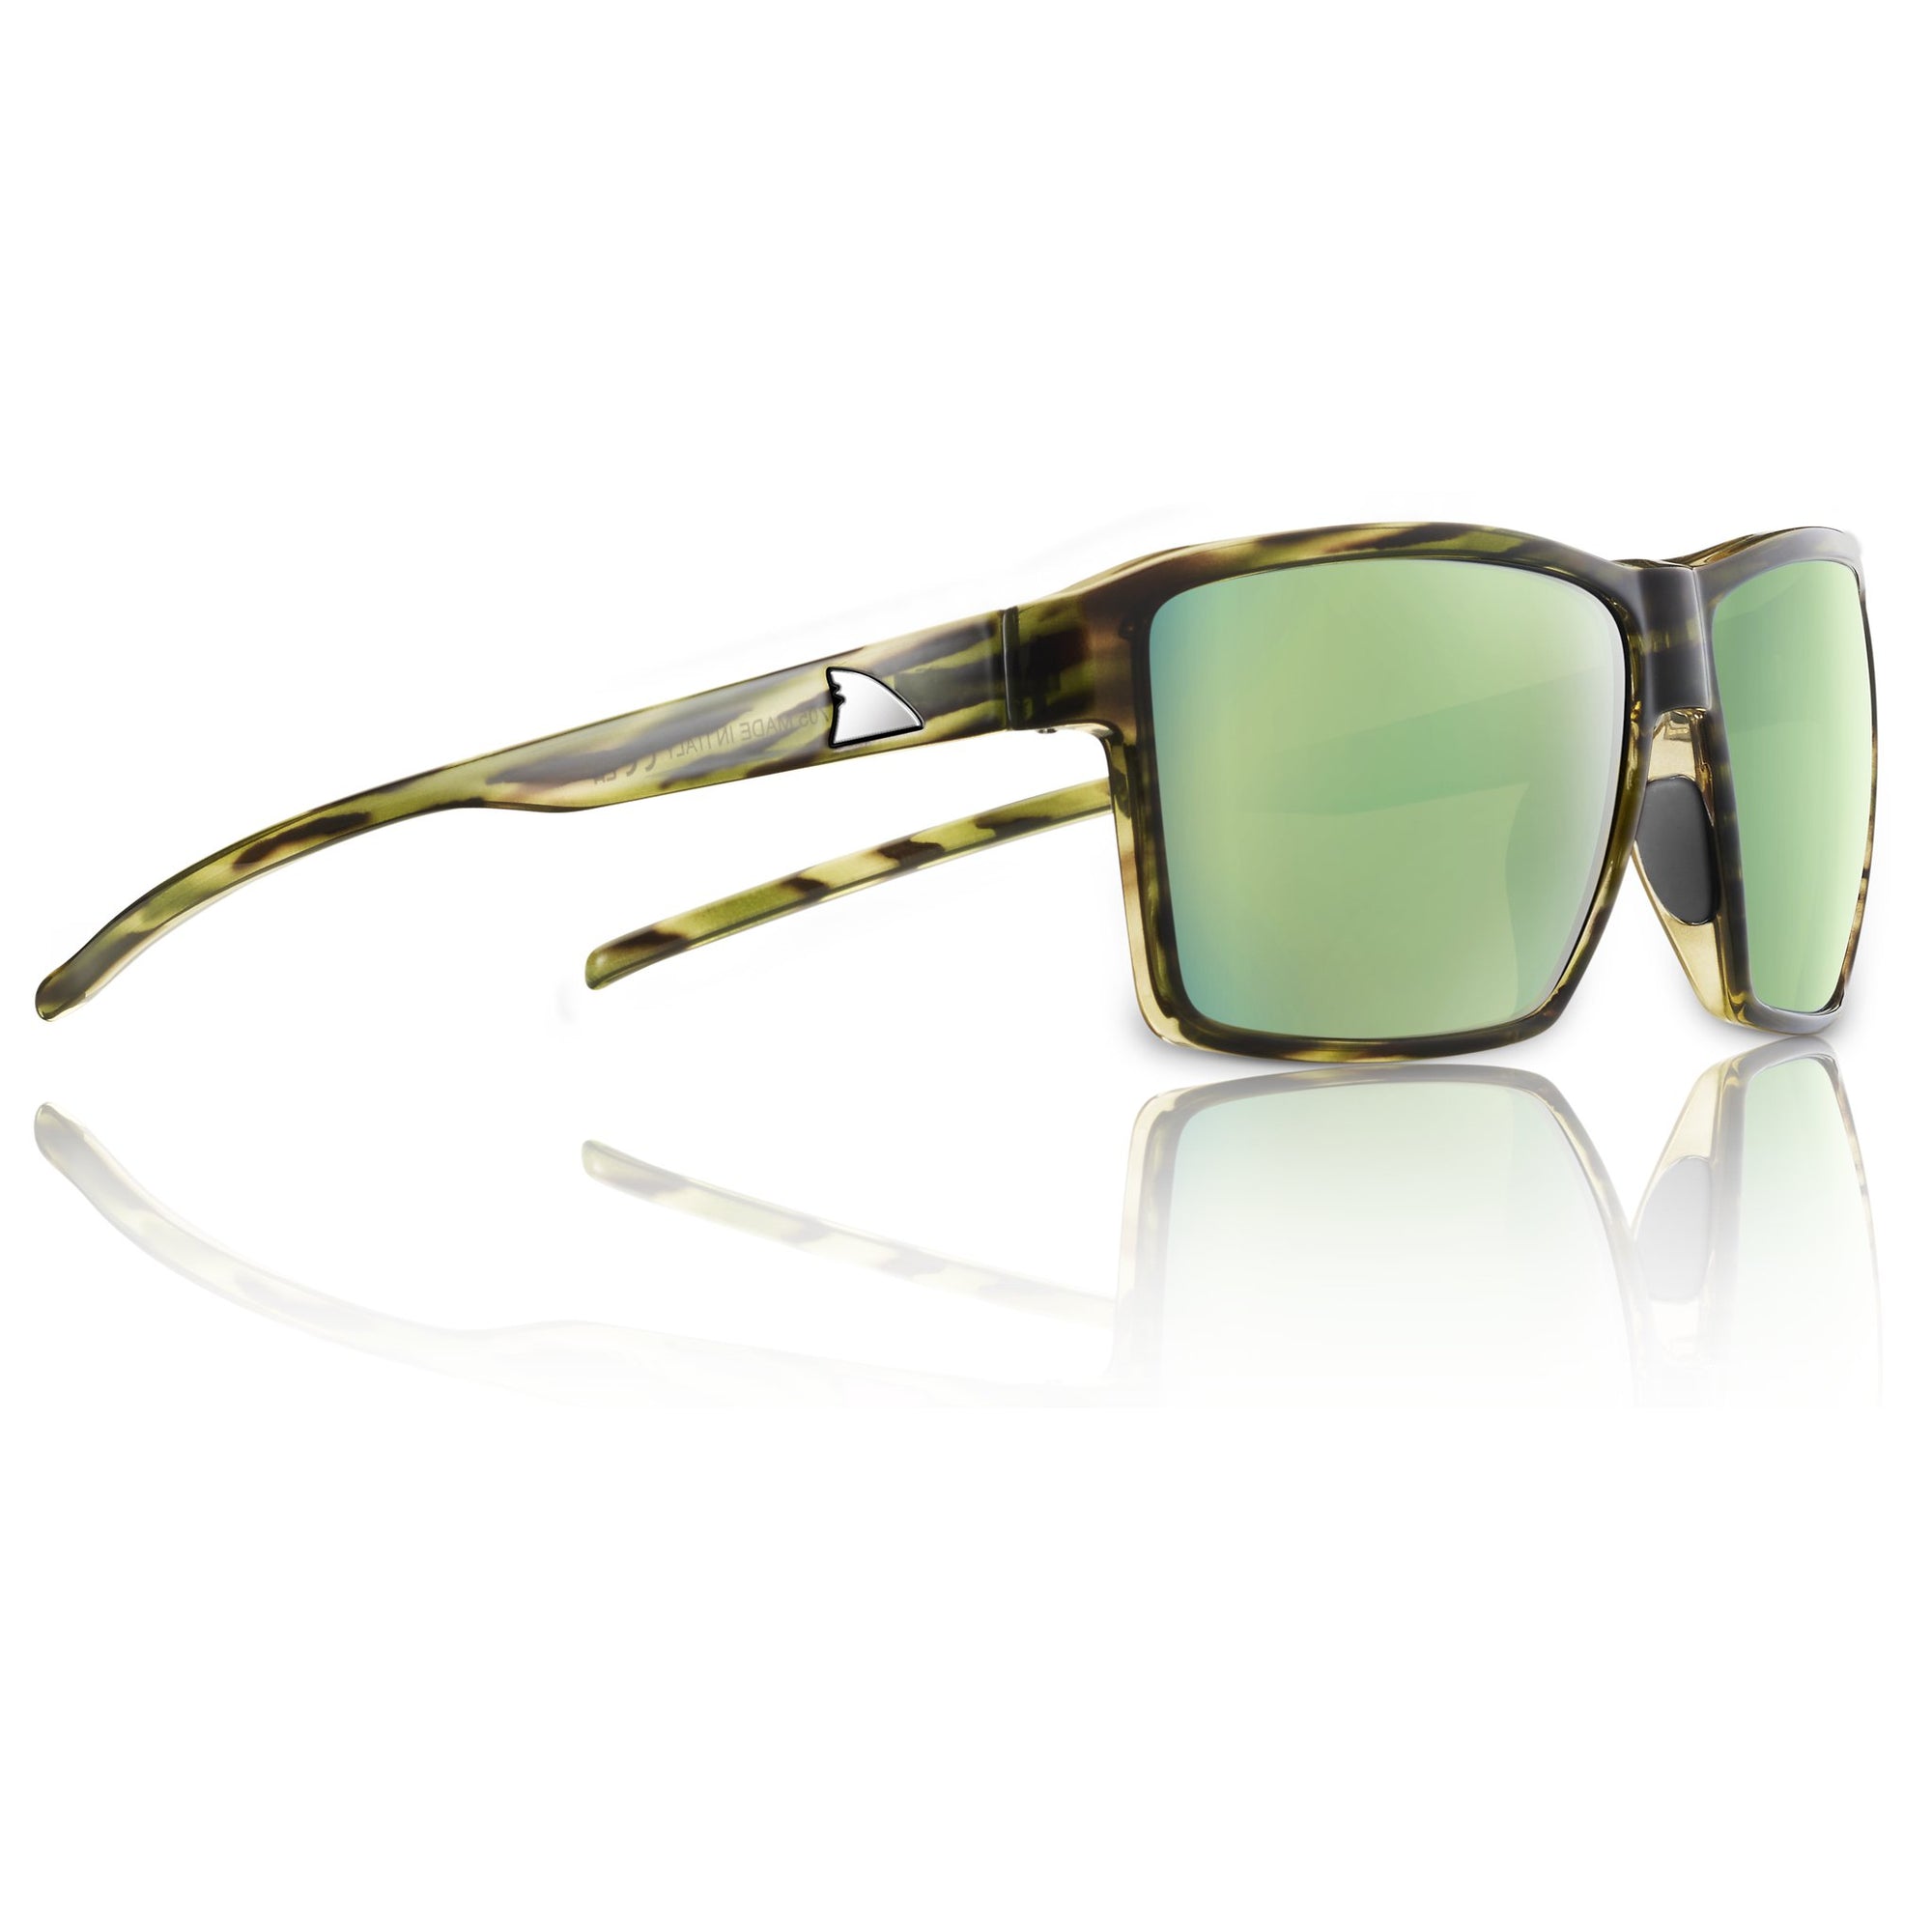 | Hatteras | Driftwood-Seagrass - RedFin Polarized